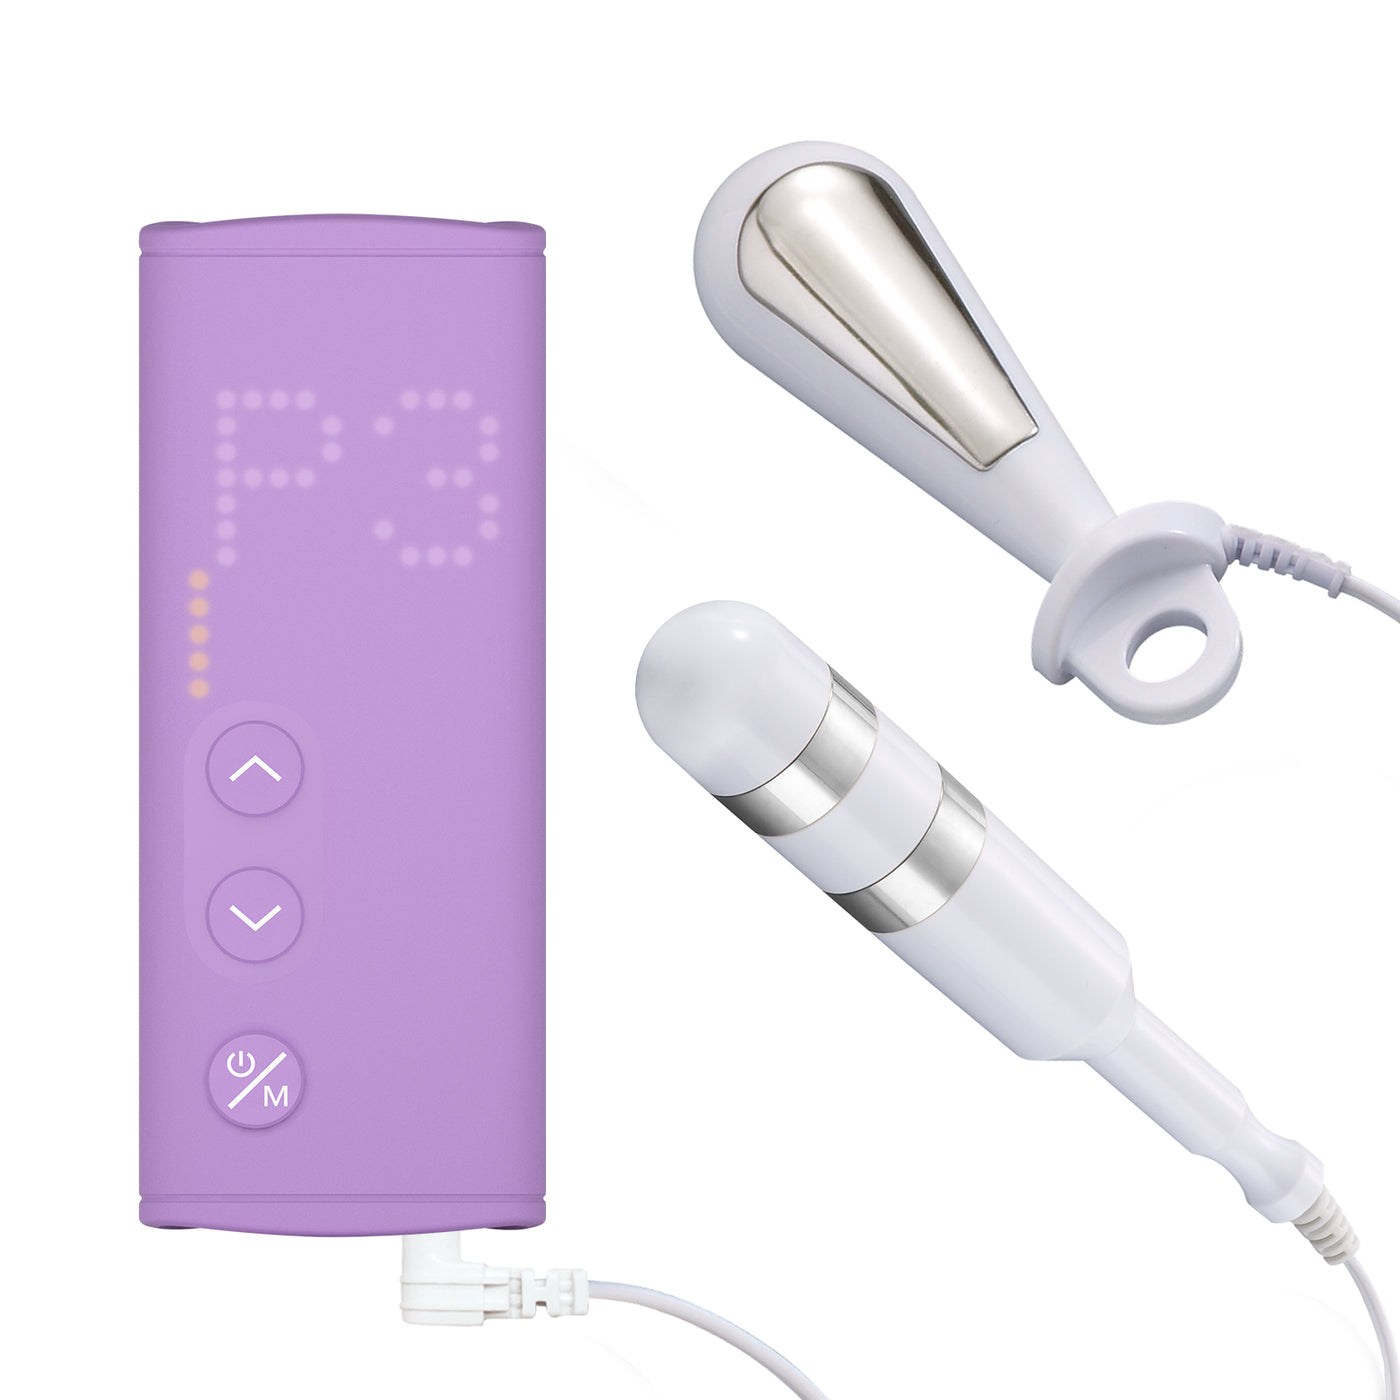 iStim EM-5200 Pelvic Floor Trainer for Incontinence Relief - Electrical Muscle Massager (EMS) for Bladder Control and Pelvic Floor Physical Therapy